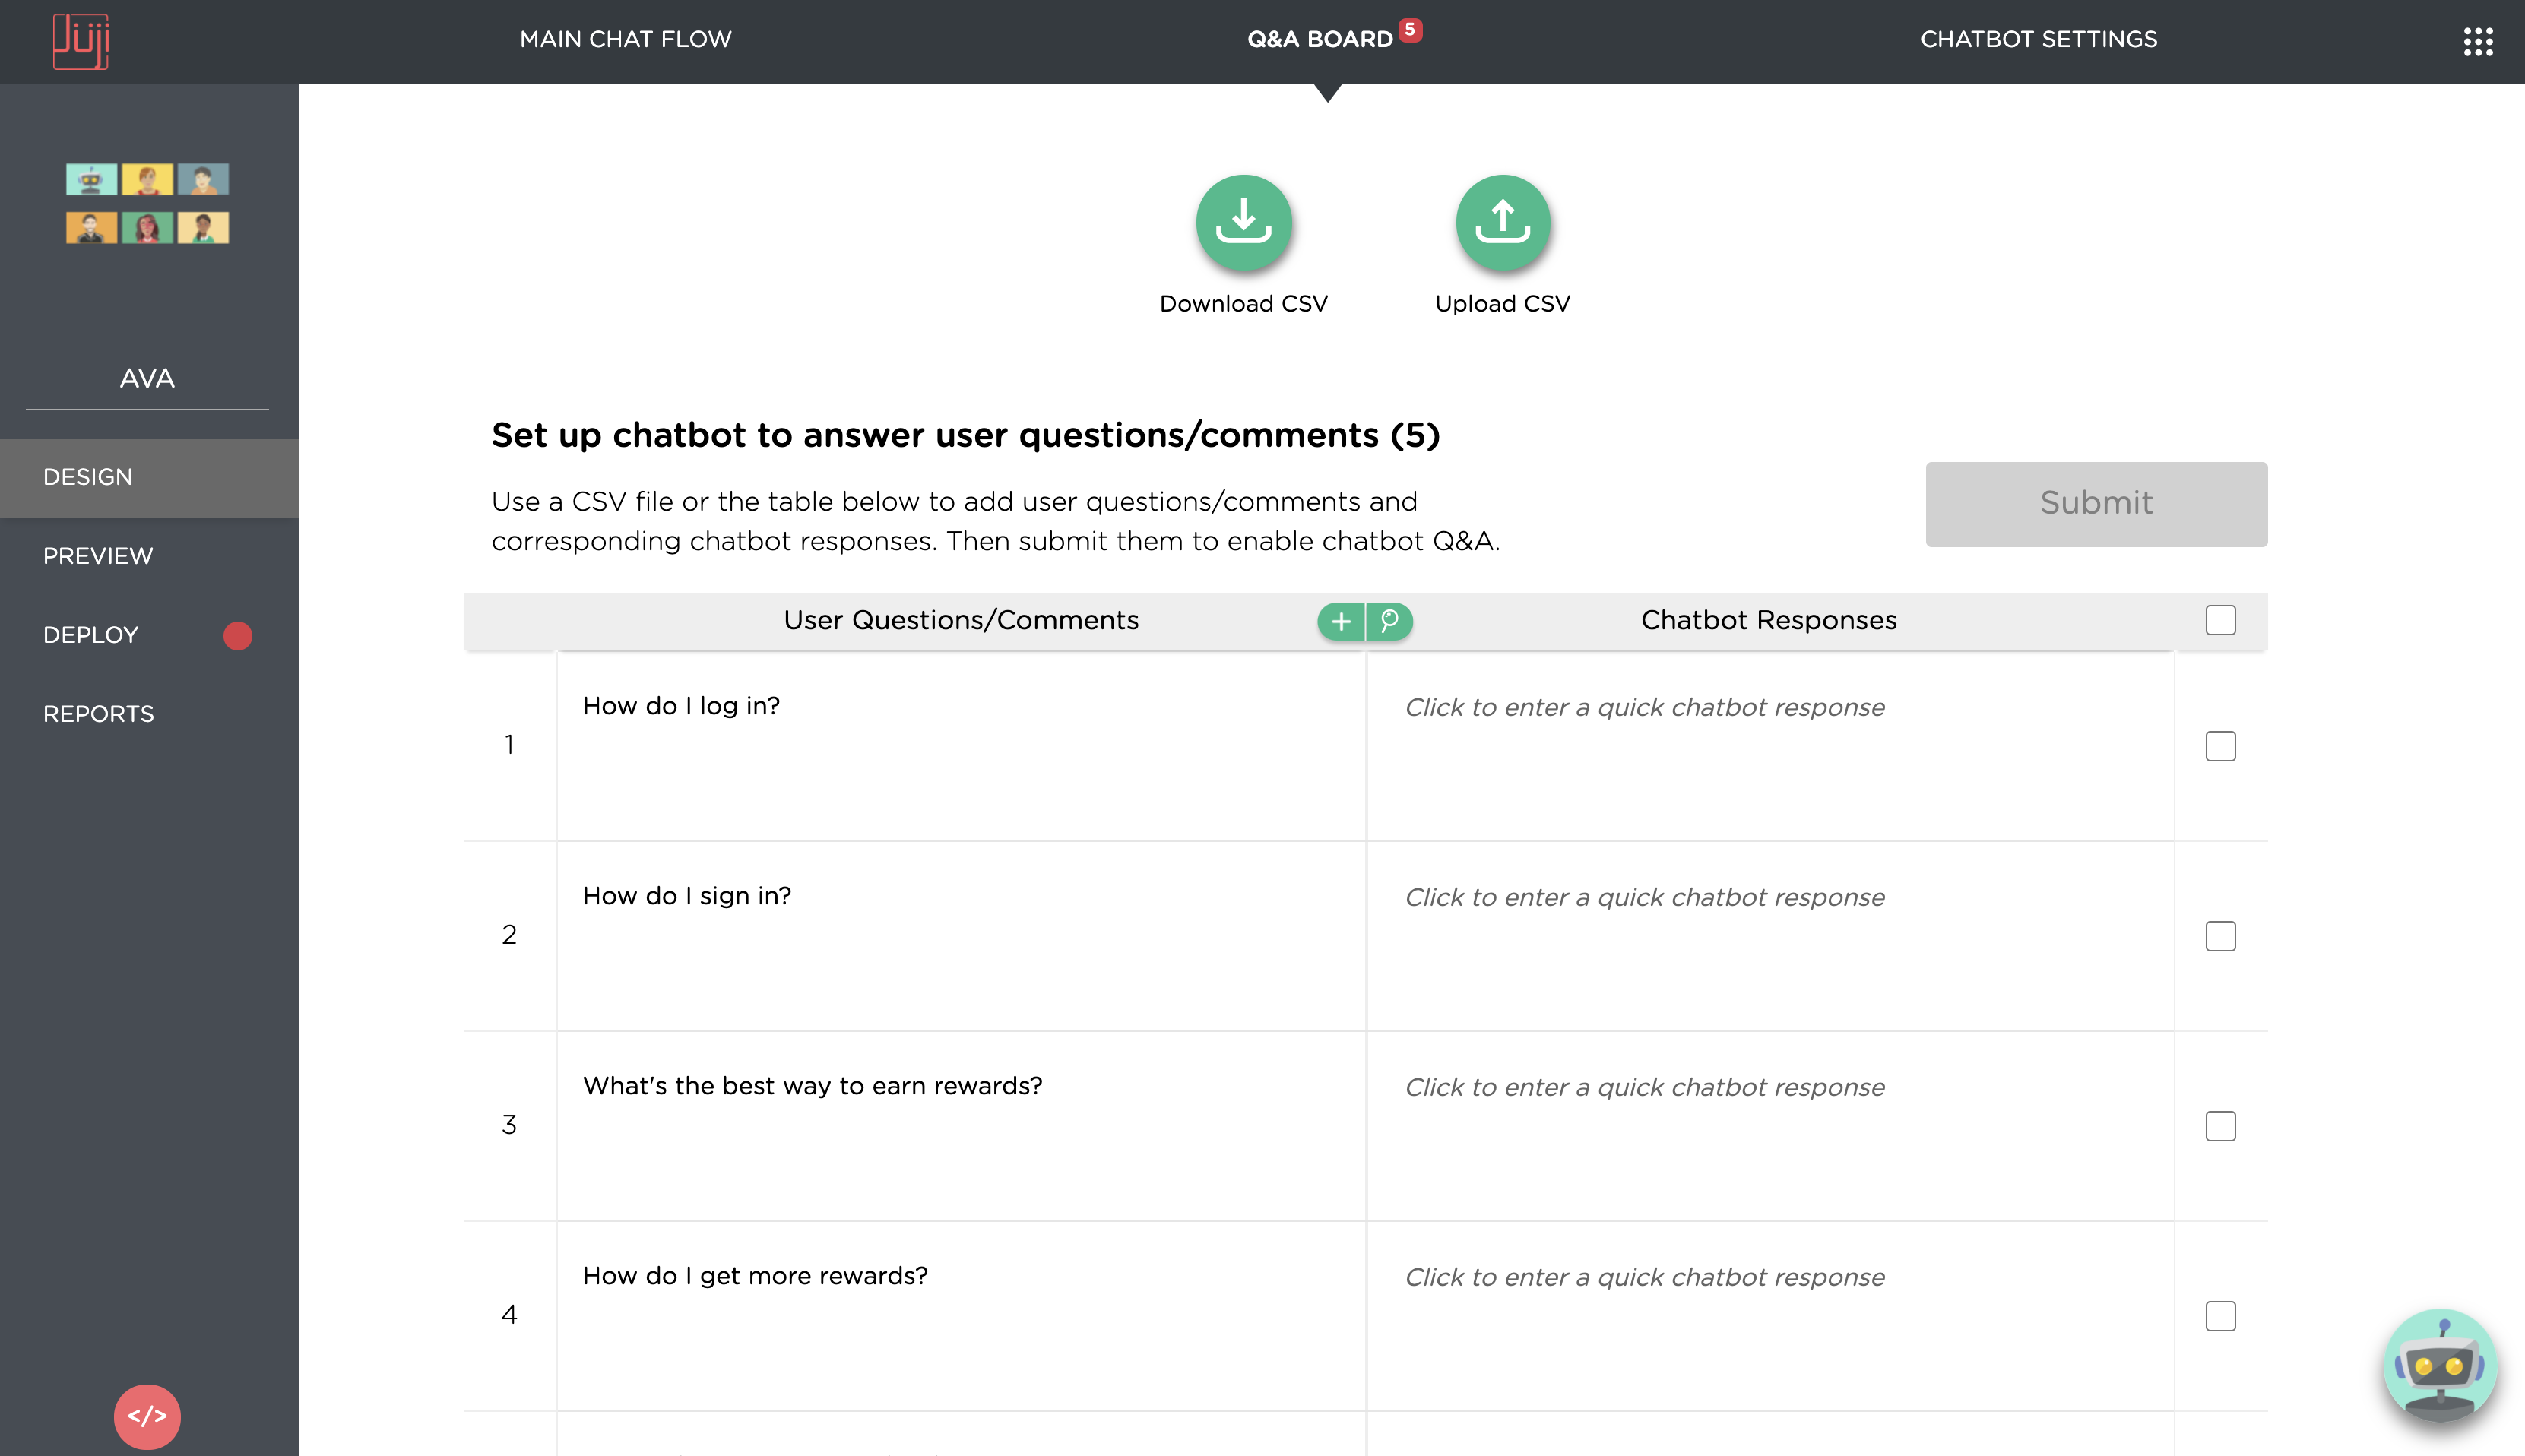 A real-time dashboard displaying a list of user questions that a chatbot cannot answer.